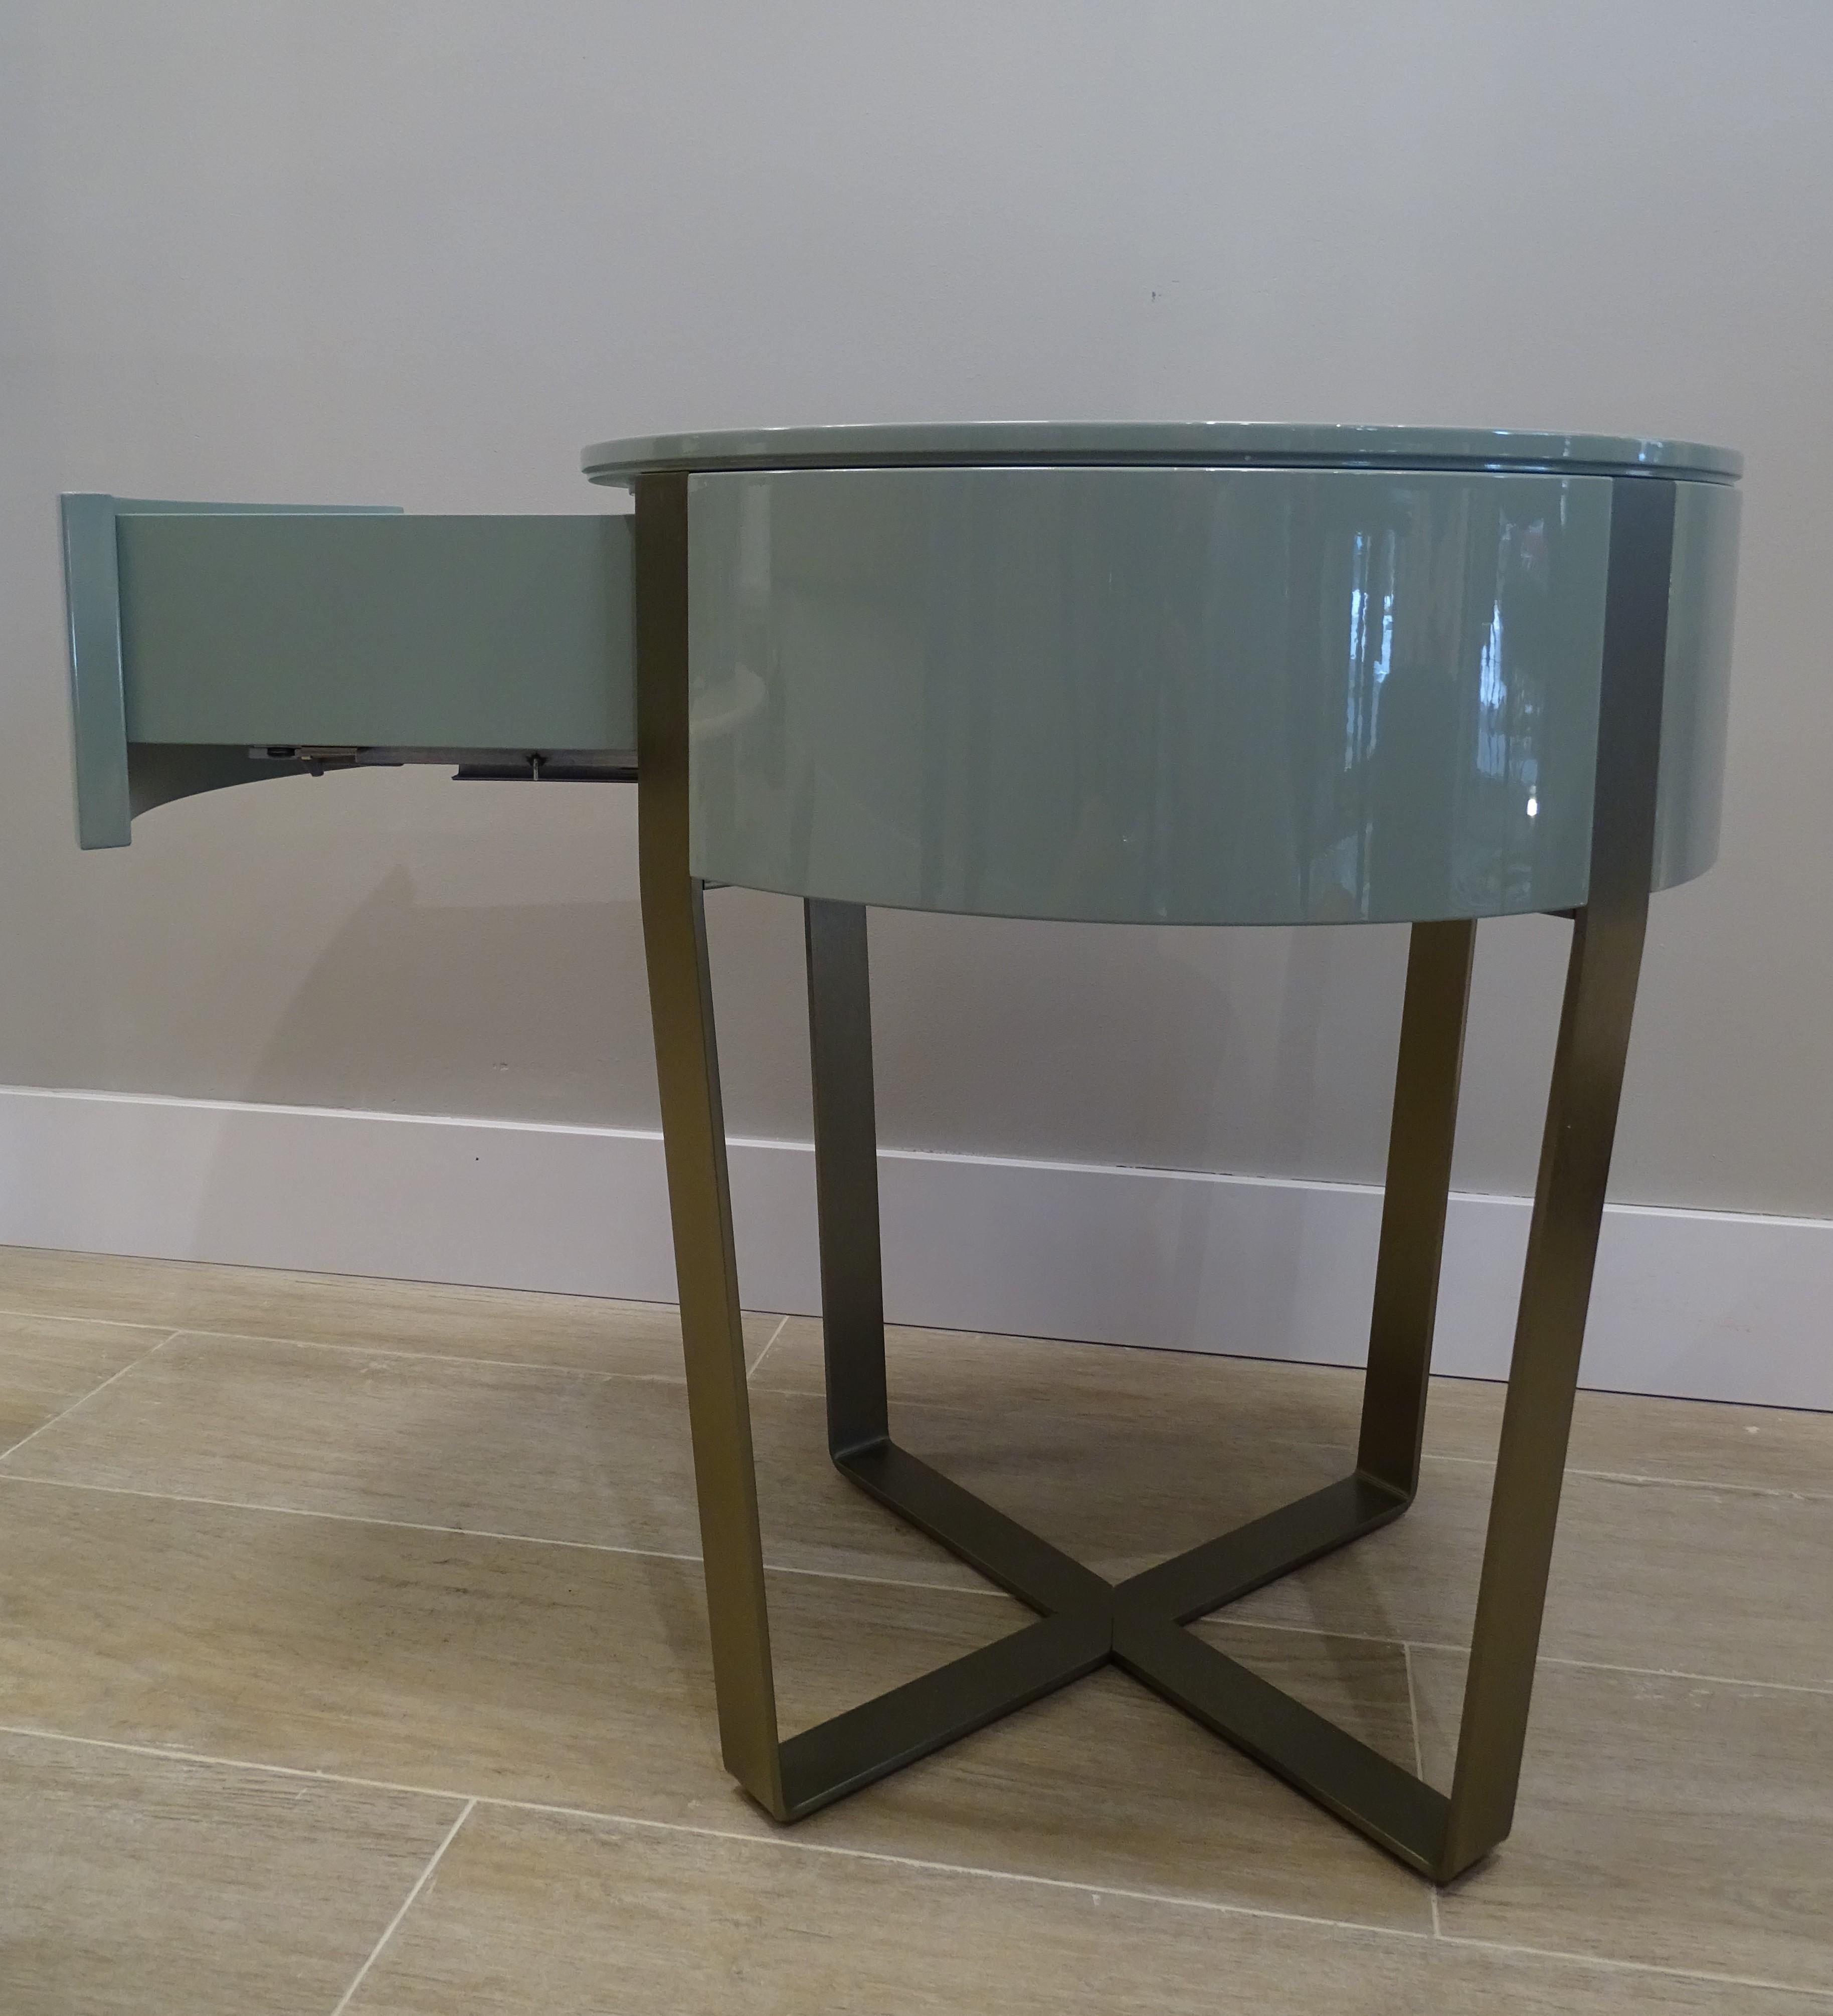 Natuzzi Italian Green Sidetable in Glossy Celadon Colour, One Drawer 5